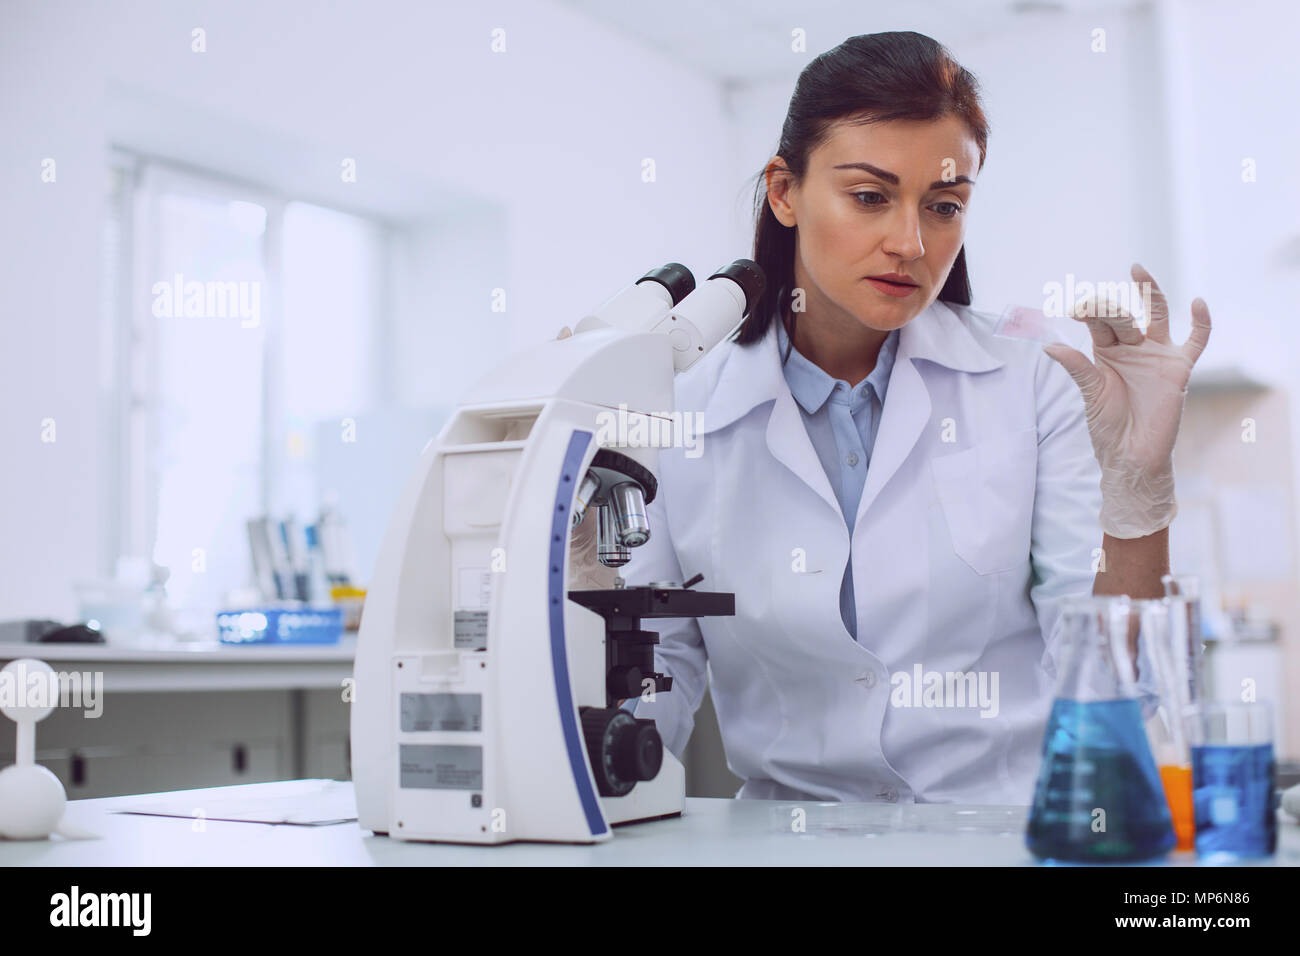 Determined biologist holding a sample Stock Photo